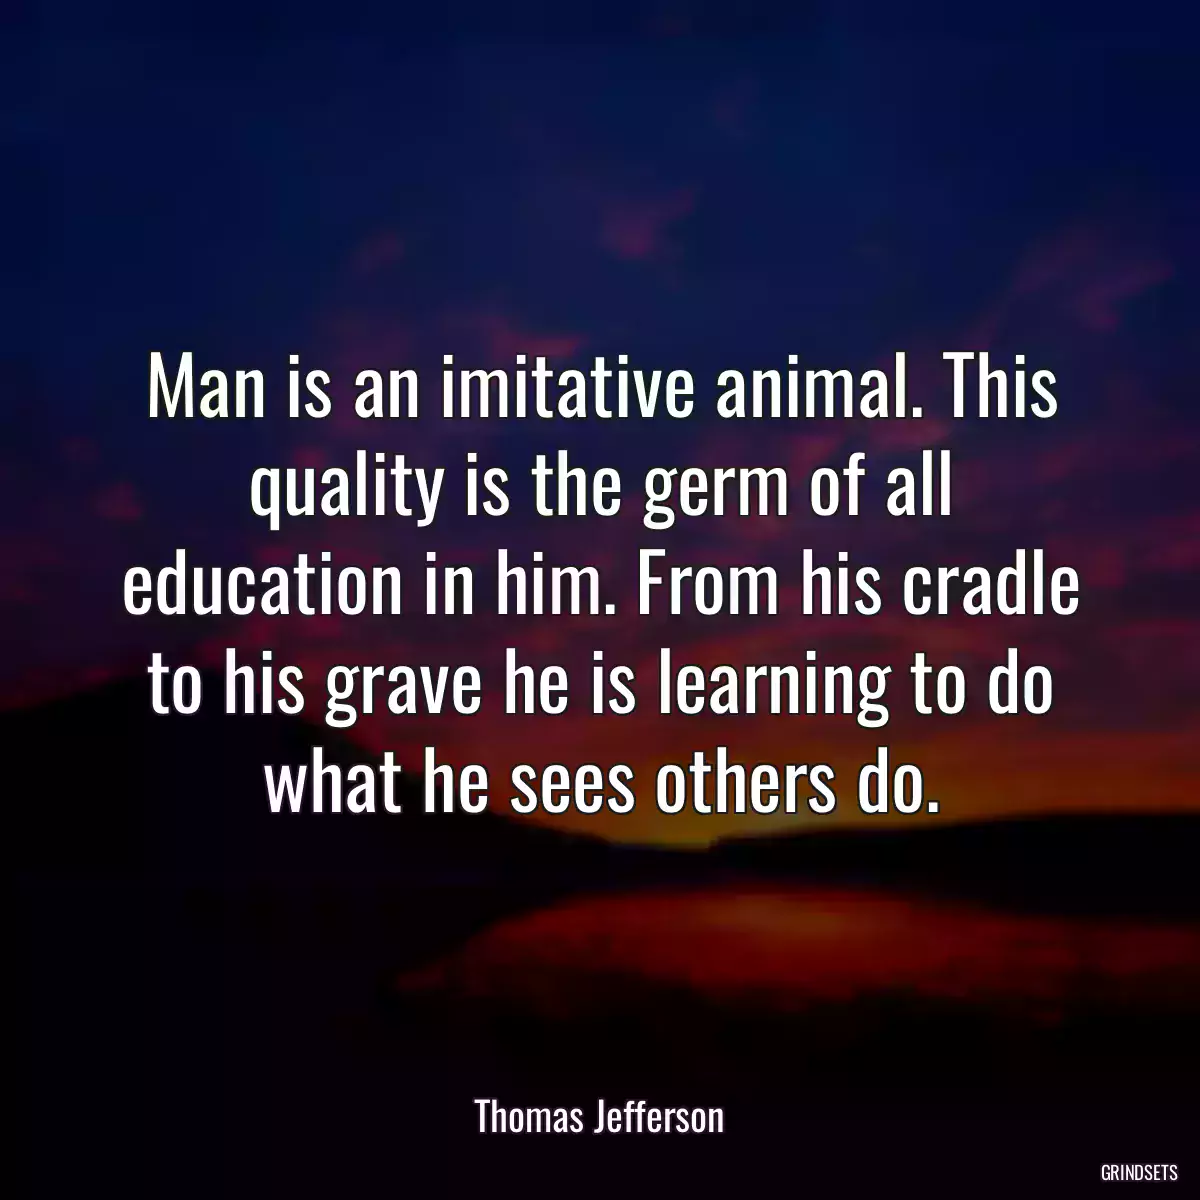 Man is an imitative animal. This quality is the germ of all education in him. From his cradle to his grave he is learning to do what he sees others do.